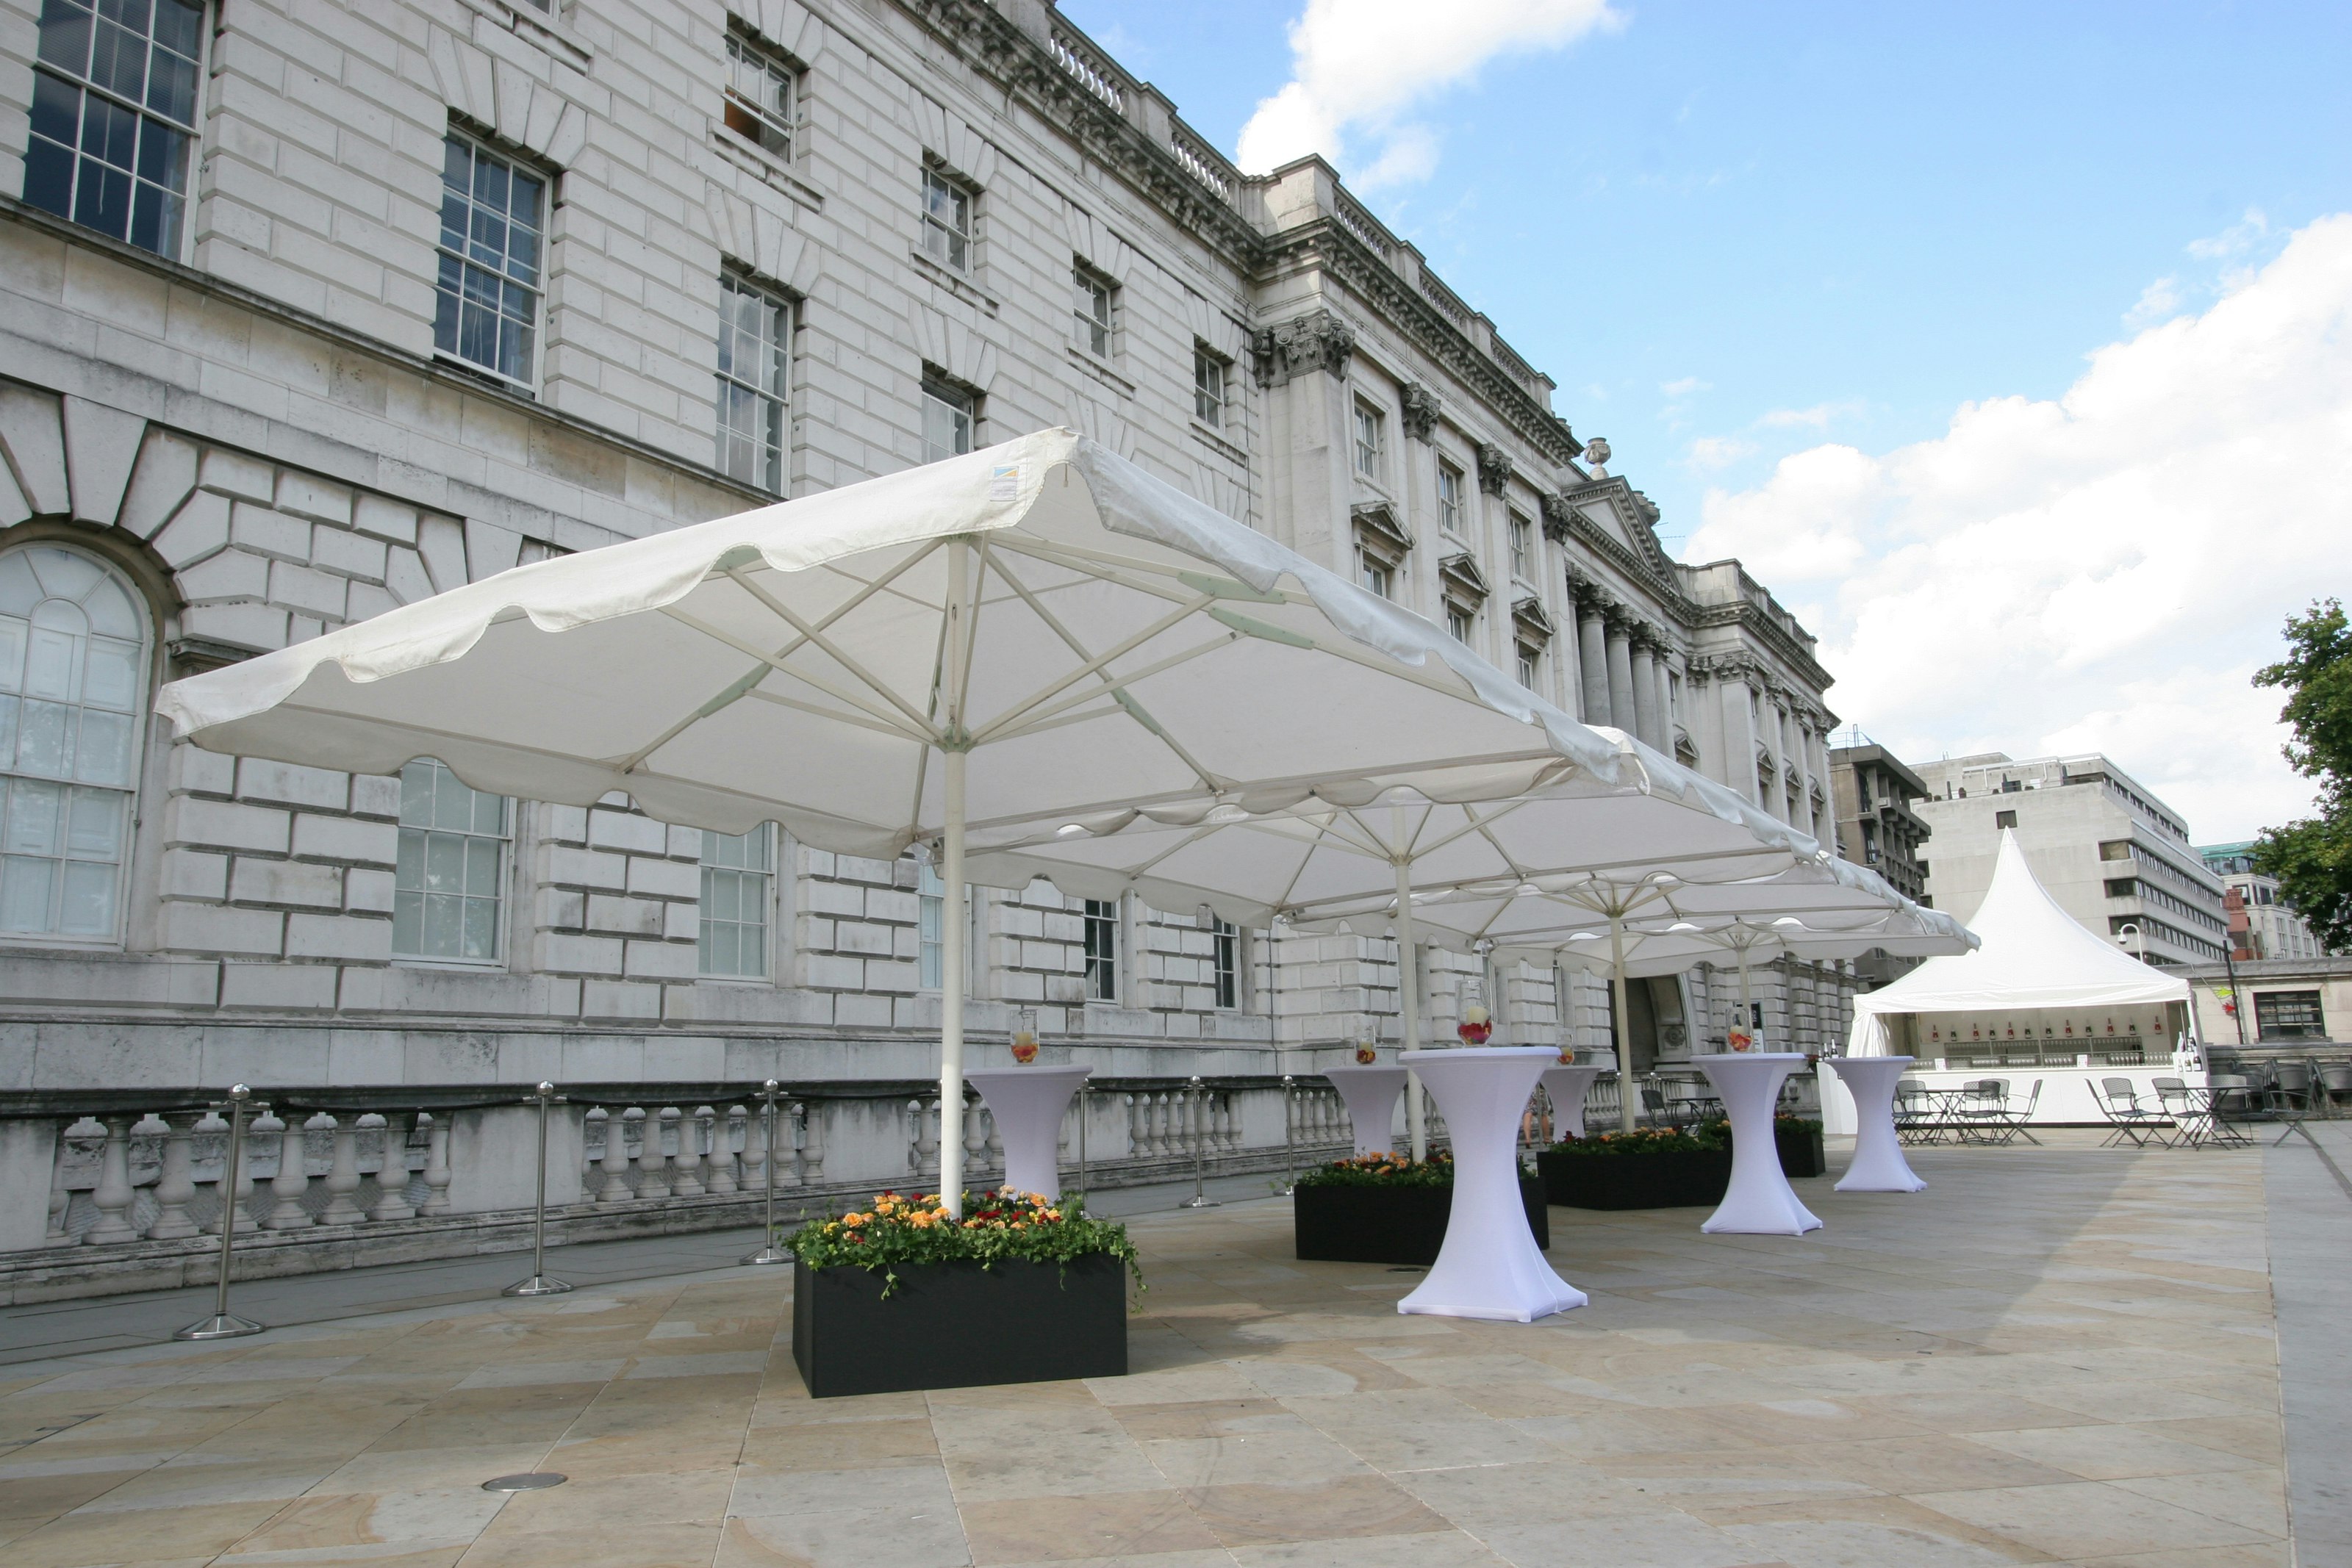 Marriage Proposal Venues in London - Somerset House